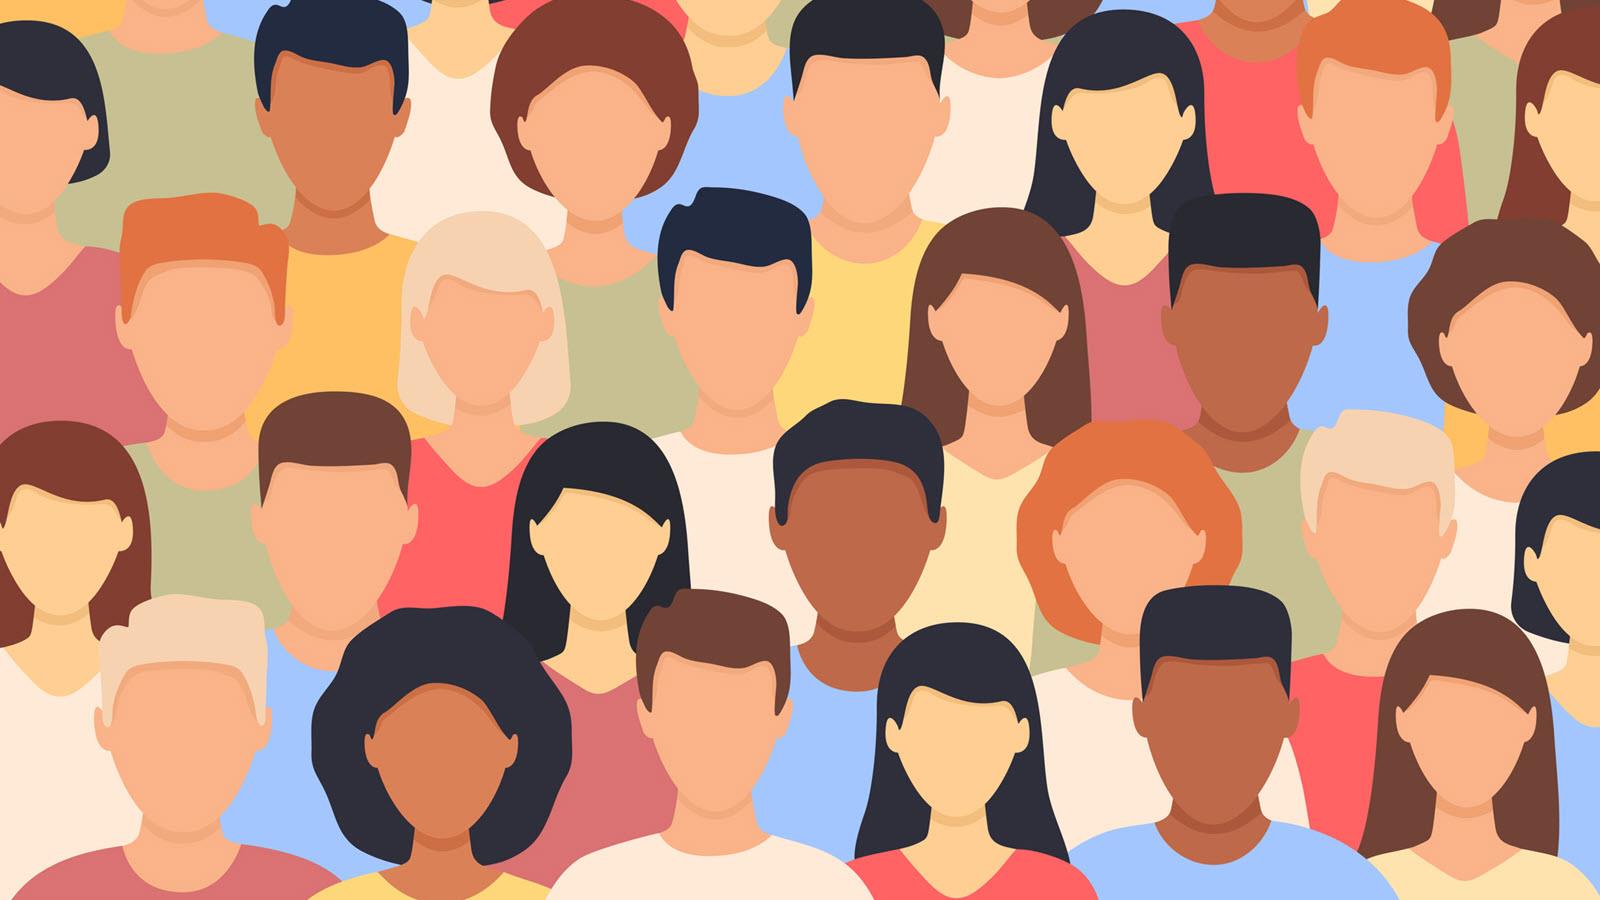 illustration of a crowd representing various races and ethnicities